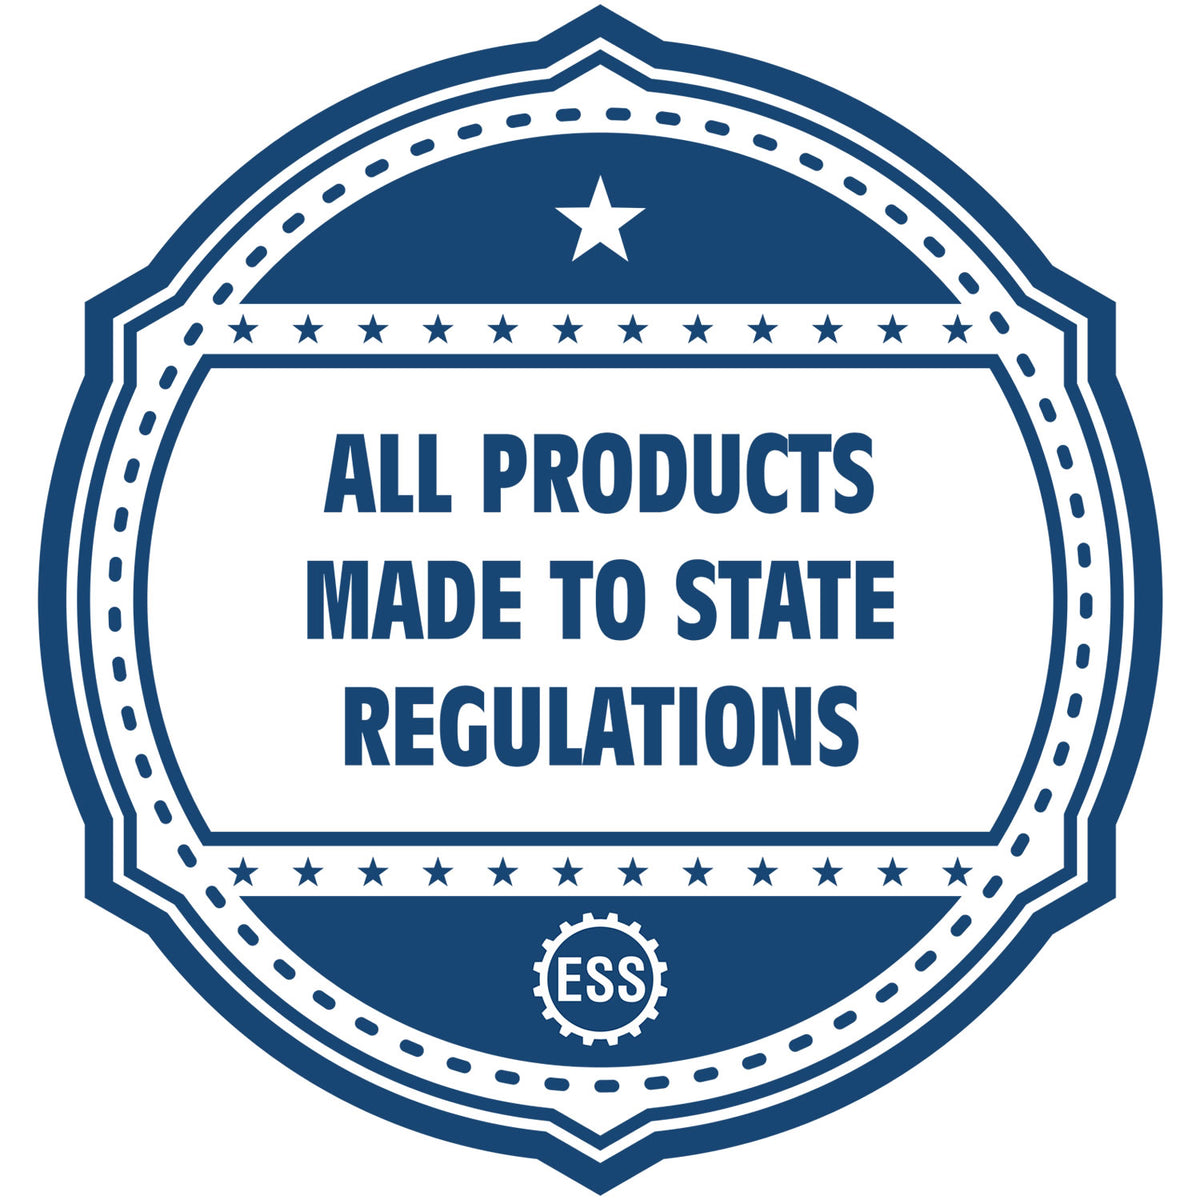 An icon or badge element for the Arizona Desk Surveyor Seal Embosser showing that this product is made in compliance with state regulations.